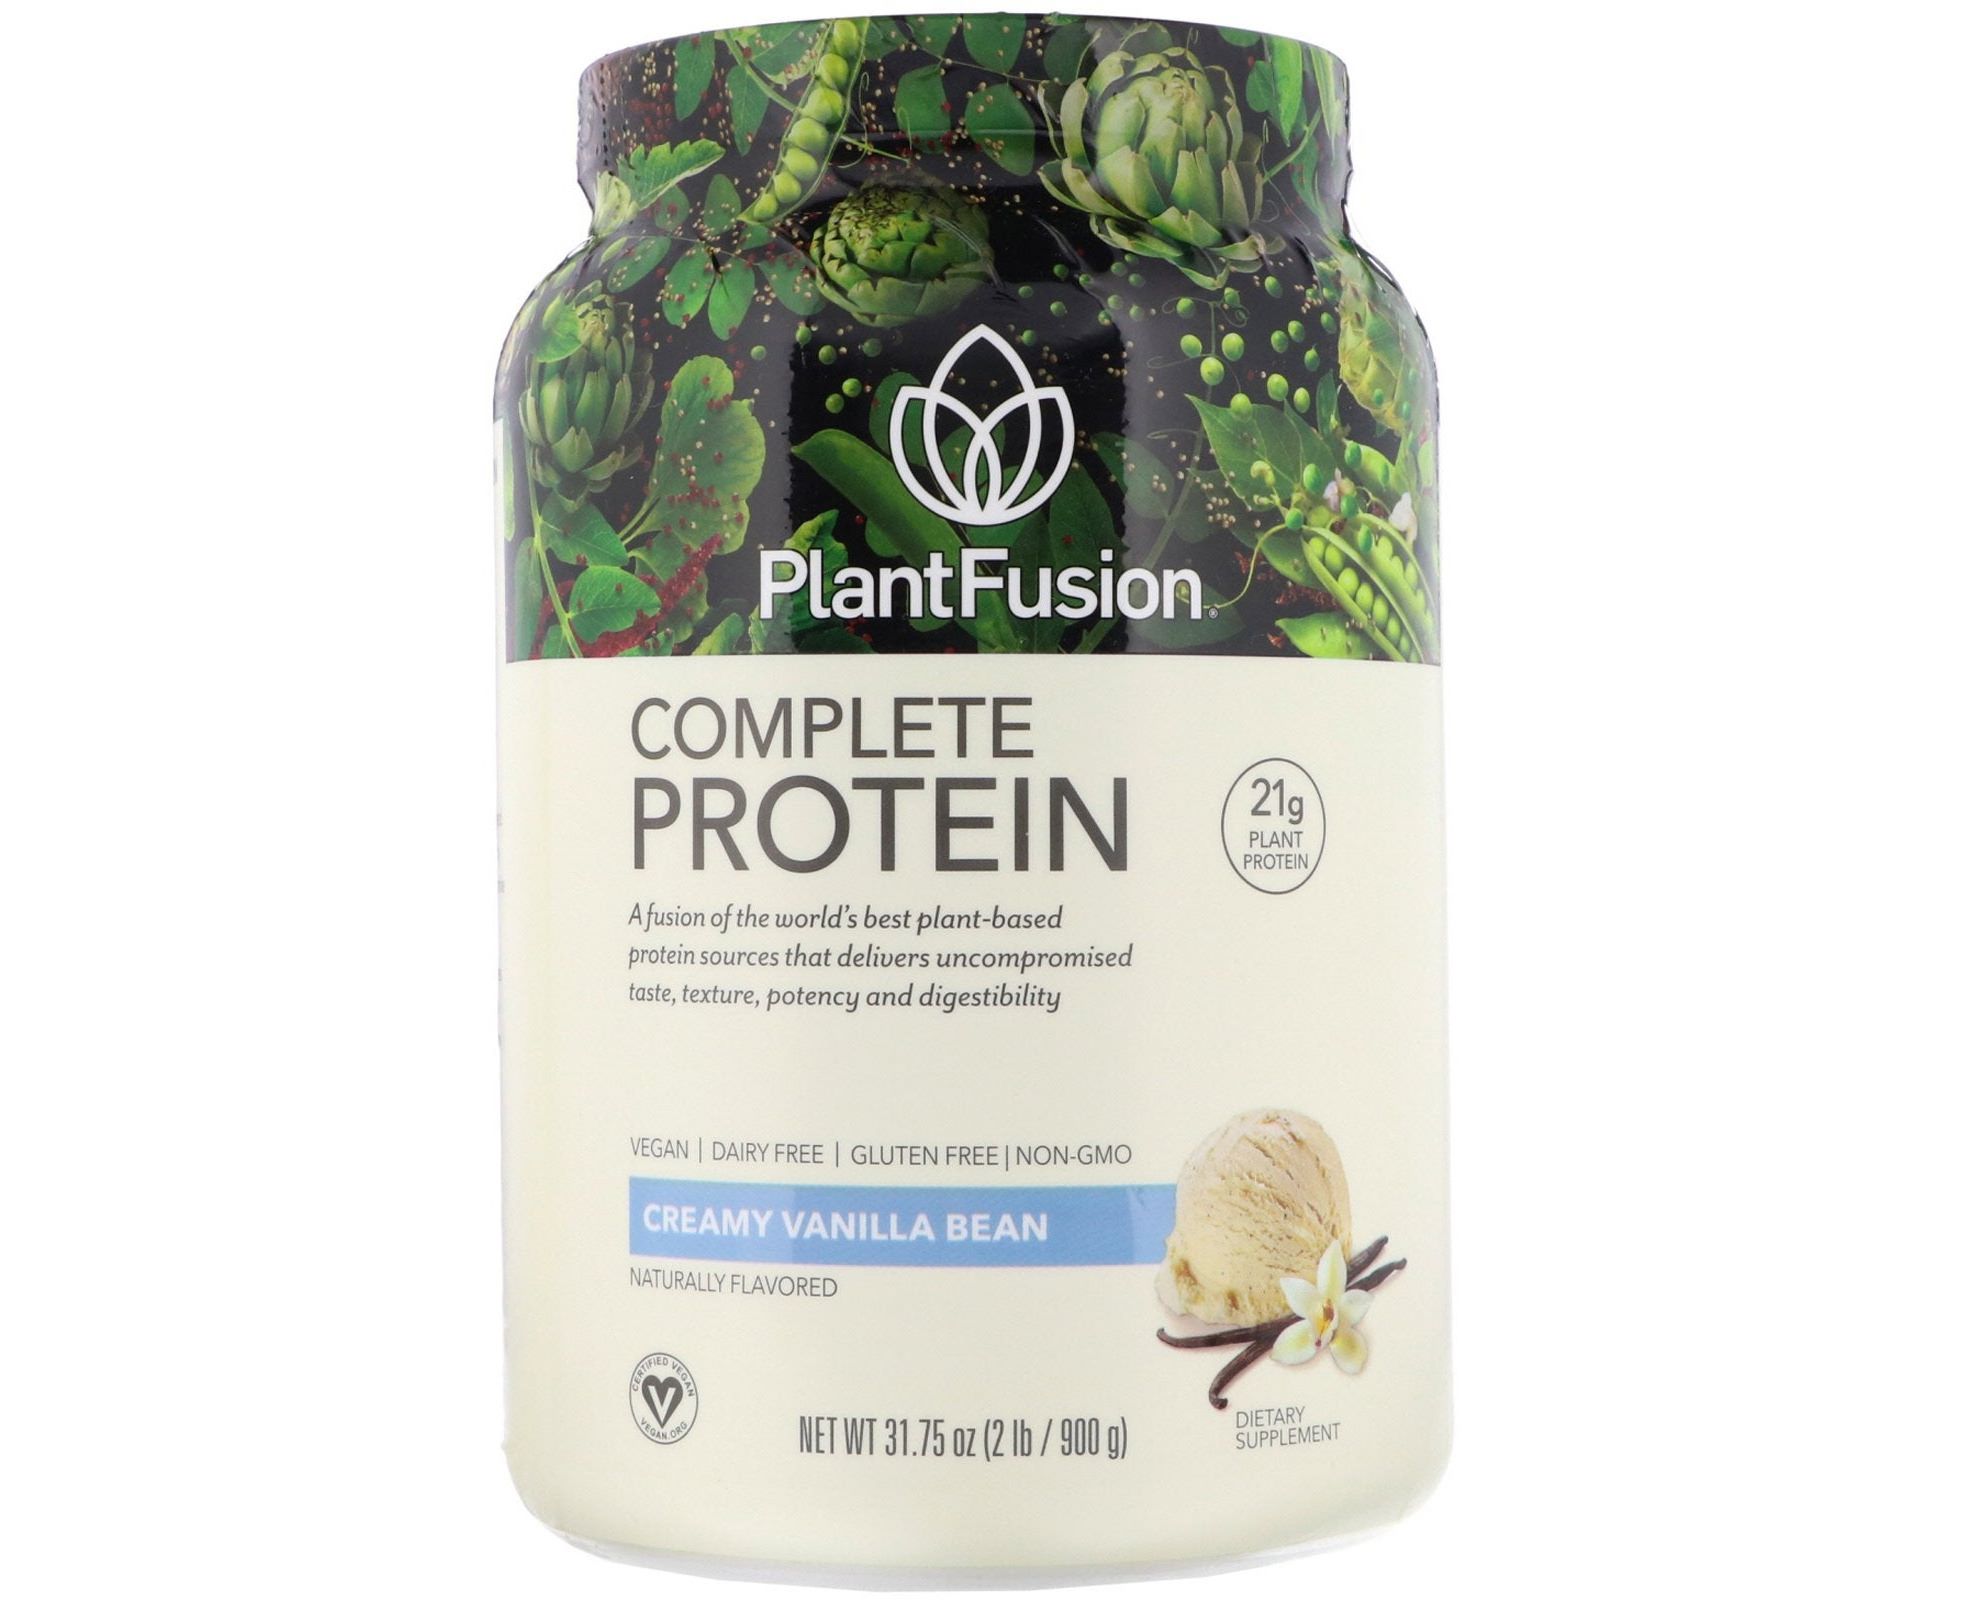 19-plant-fusion-protein-nutrition-facts